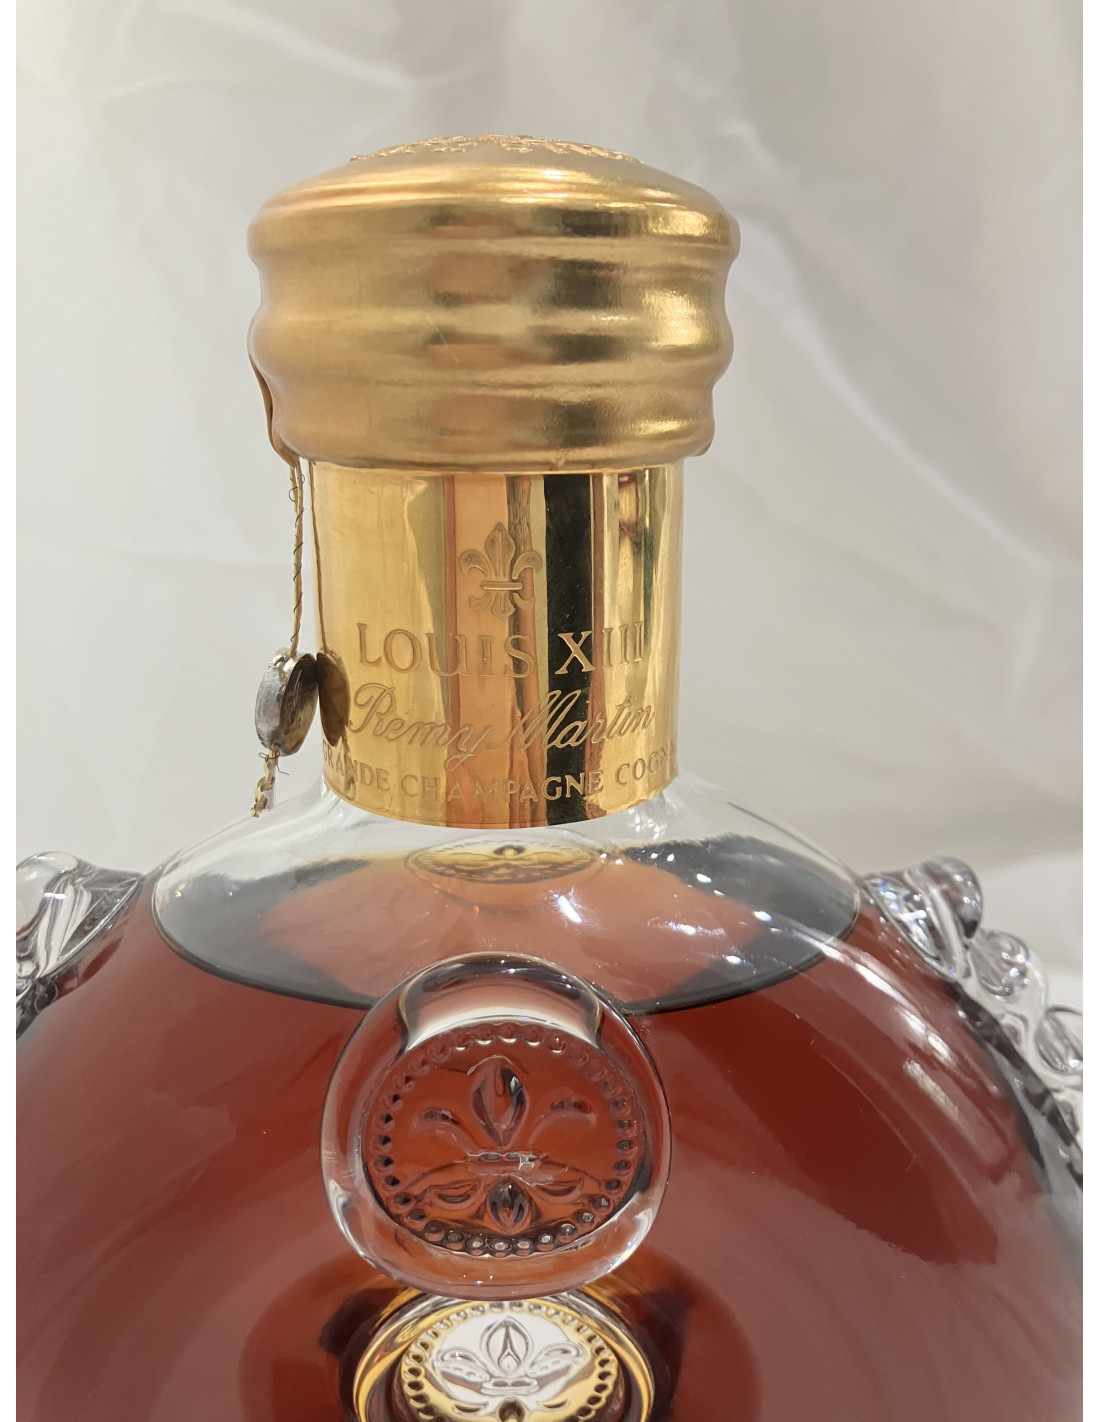 Remy Martin Louis XIII Cognac Baccarat Crystal Decanter Empty Bottle with  Box